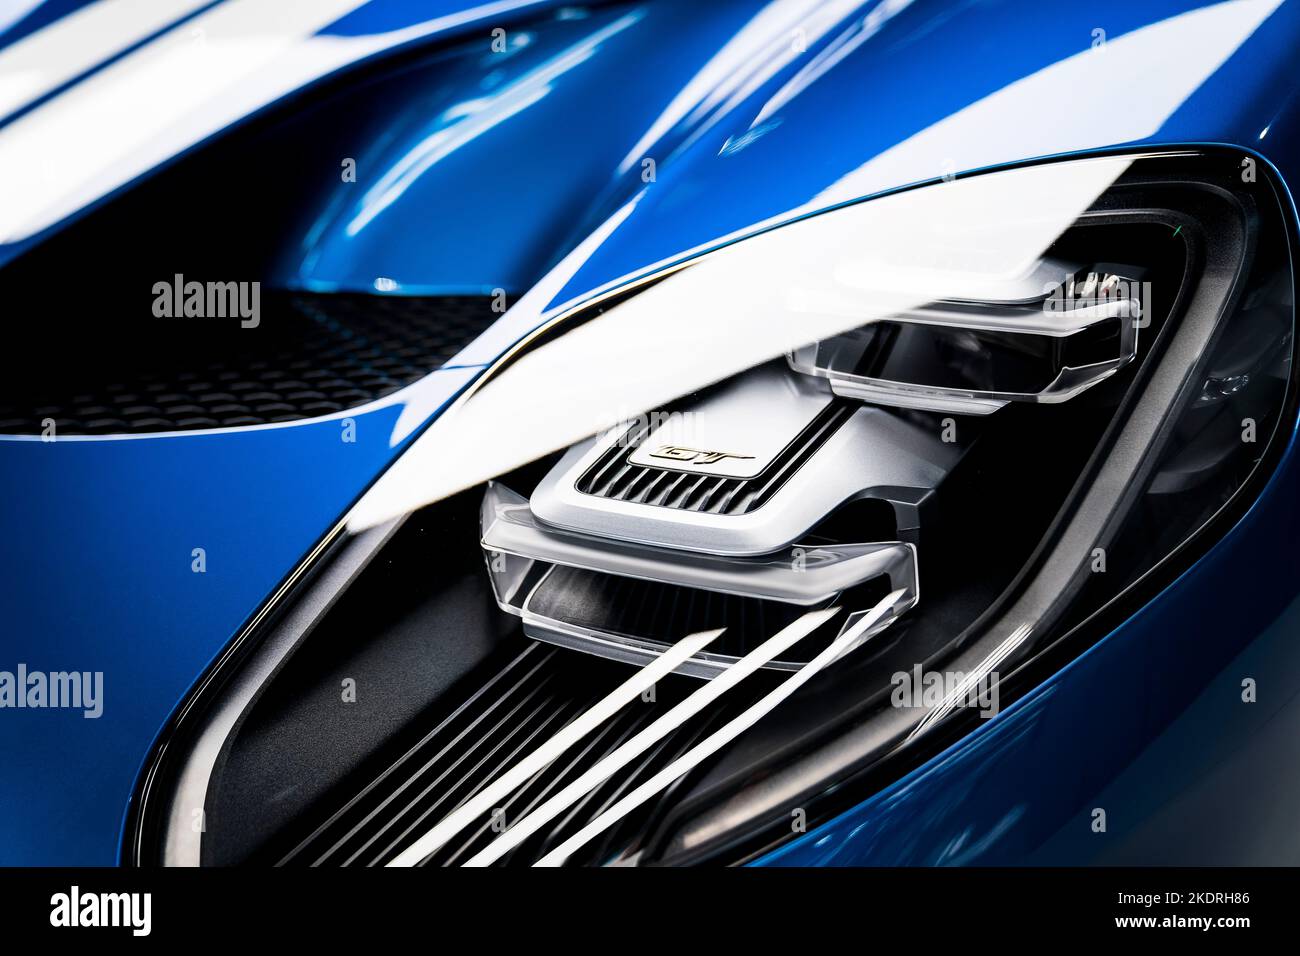 Blue Ford GT headlight with light reflection Stock Photo